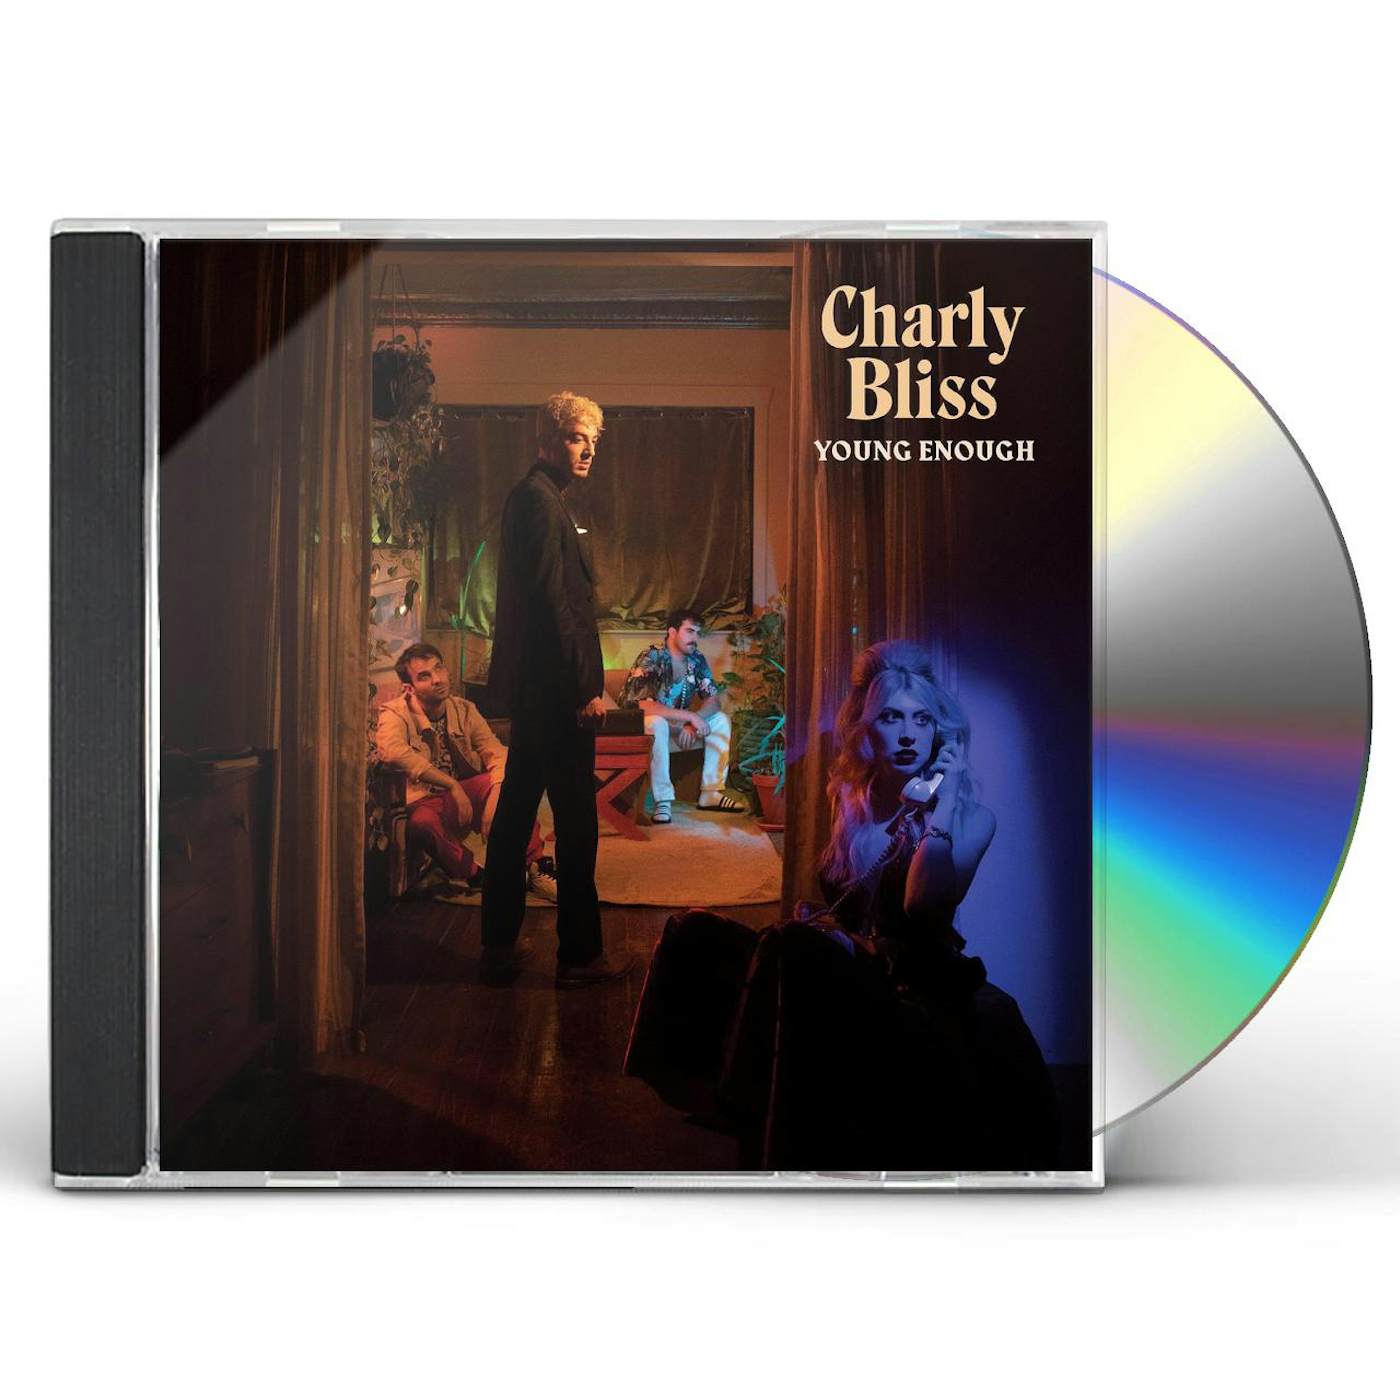 Charly Bliss YOUNG ENOUGH CD